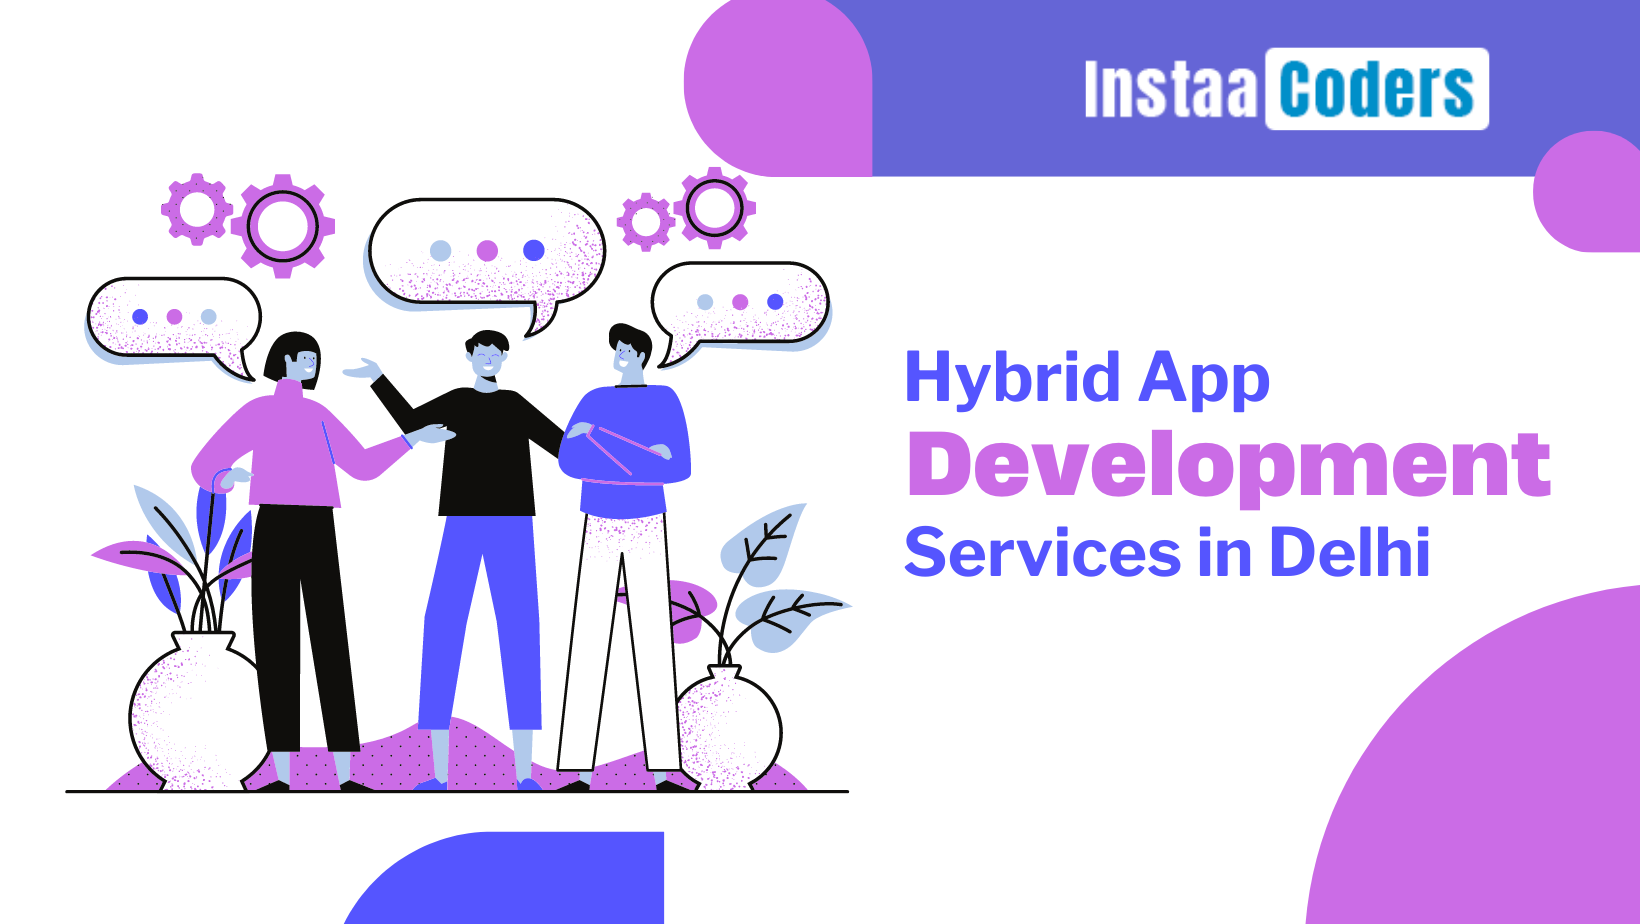 When can you select Hybrid App Development Services in Delhi?